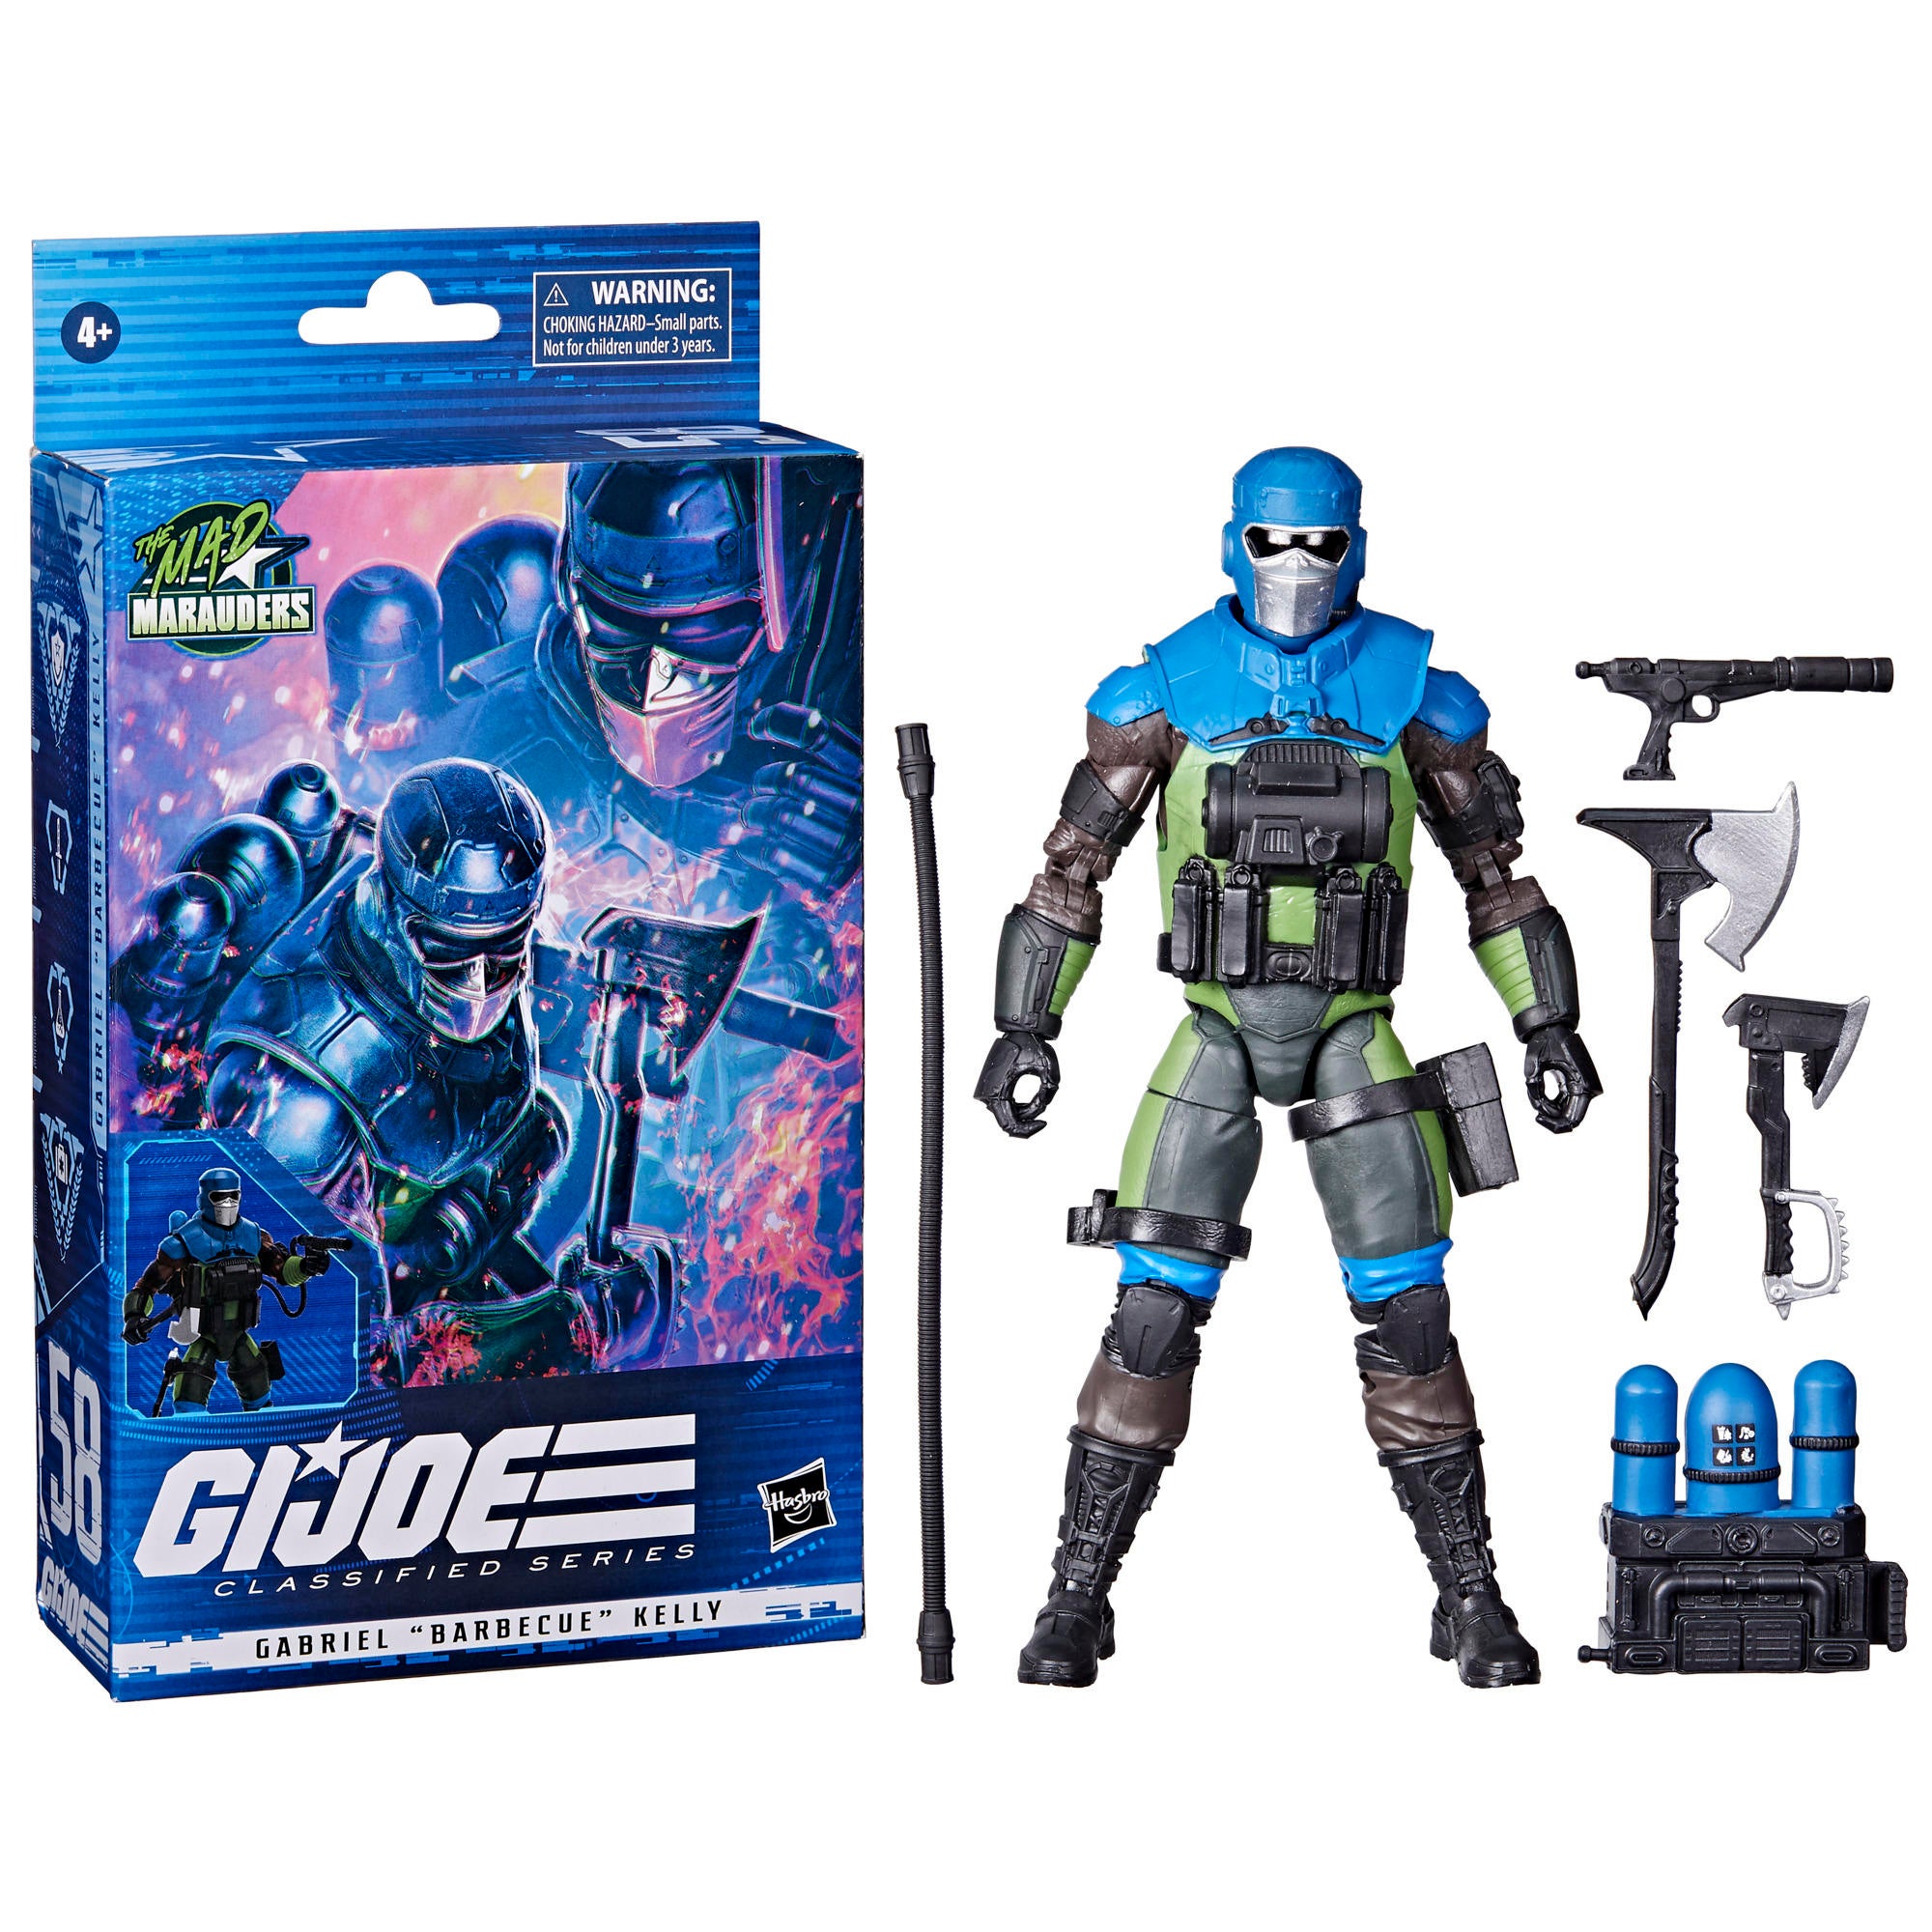 G.I. Joe Classified Series Pulse Con 2022 PreOrders Are Available Now